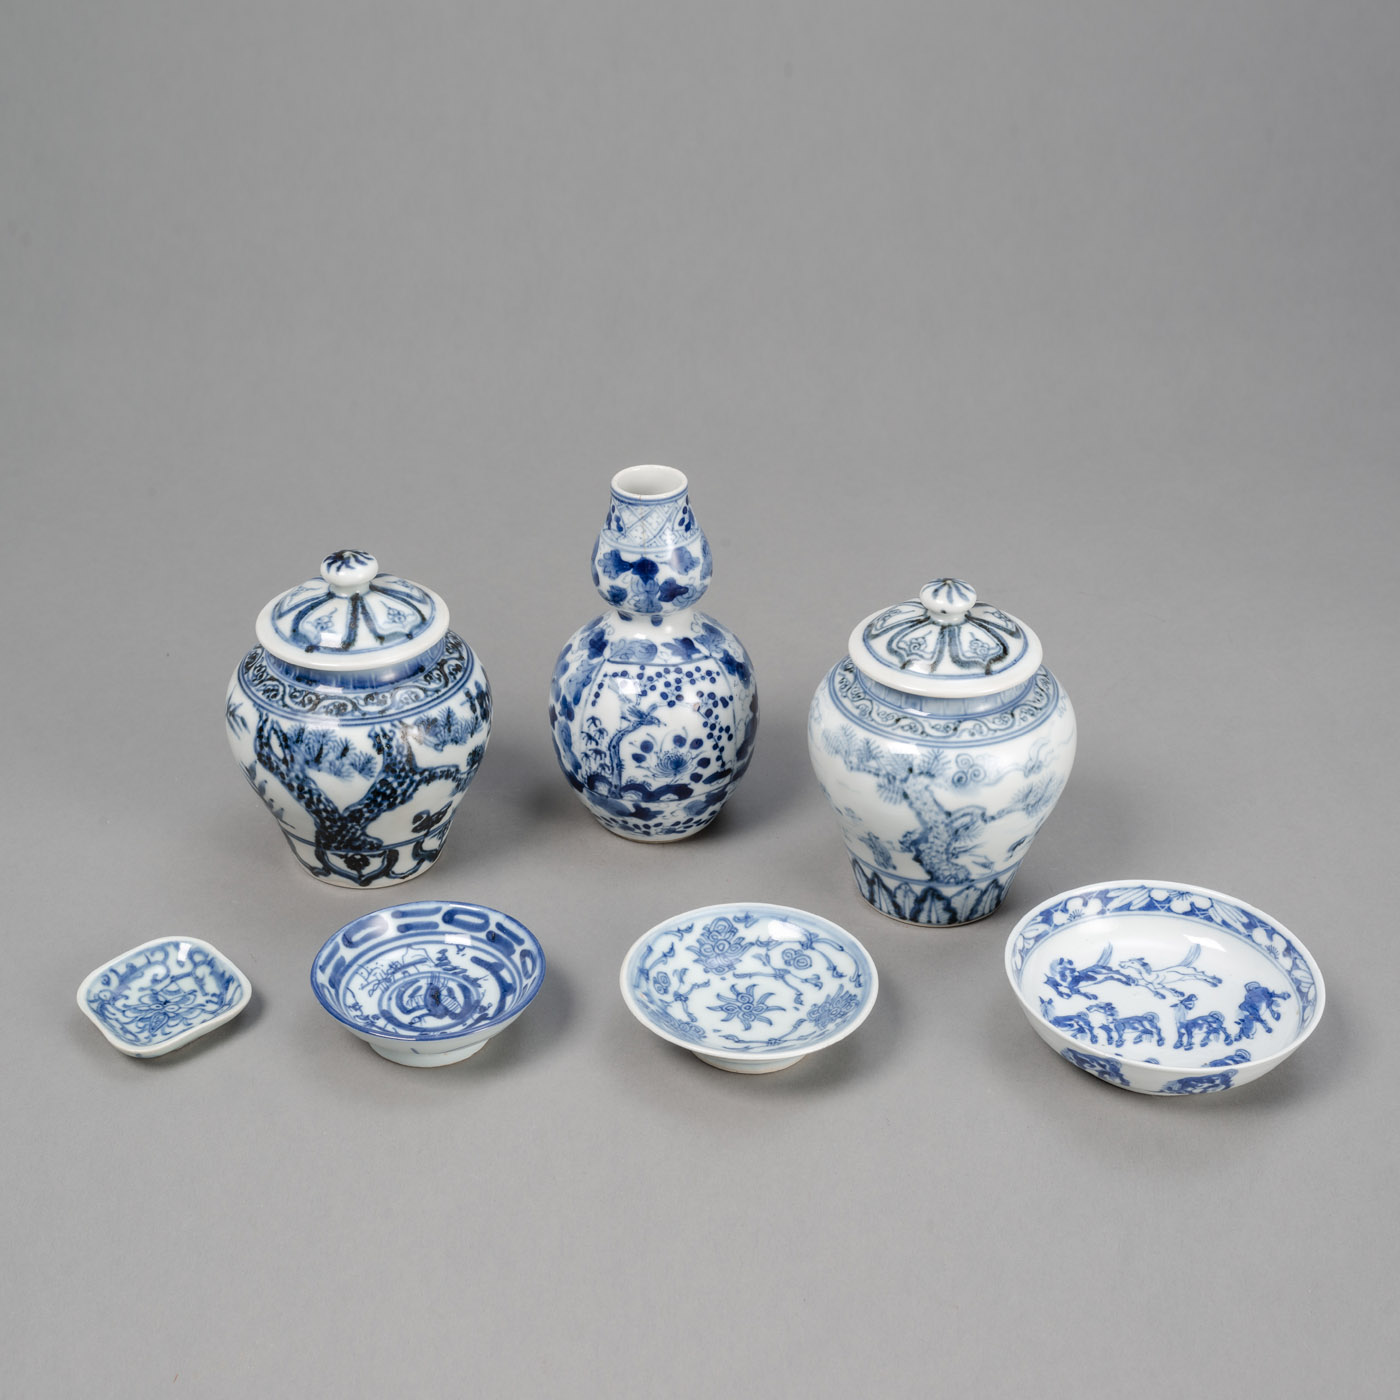 <b>A GROUP OF BLUE AND WHITE PORCELAIN PIECES, E.G. TWO LIDDED VASES, ONE 'HULUPING', A HORSES DISH</b>